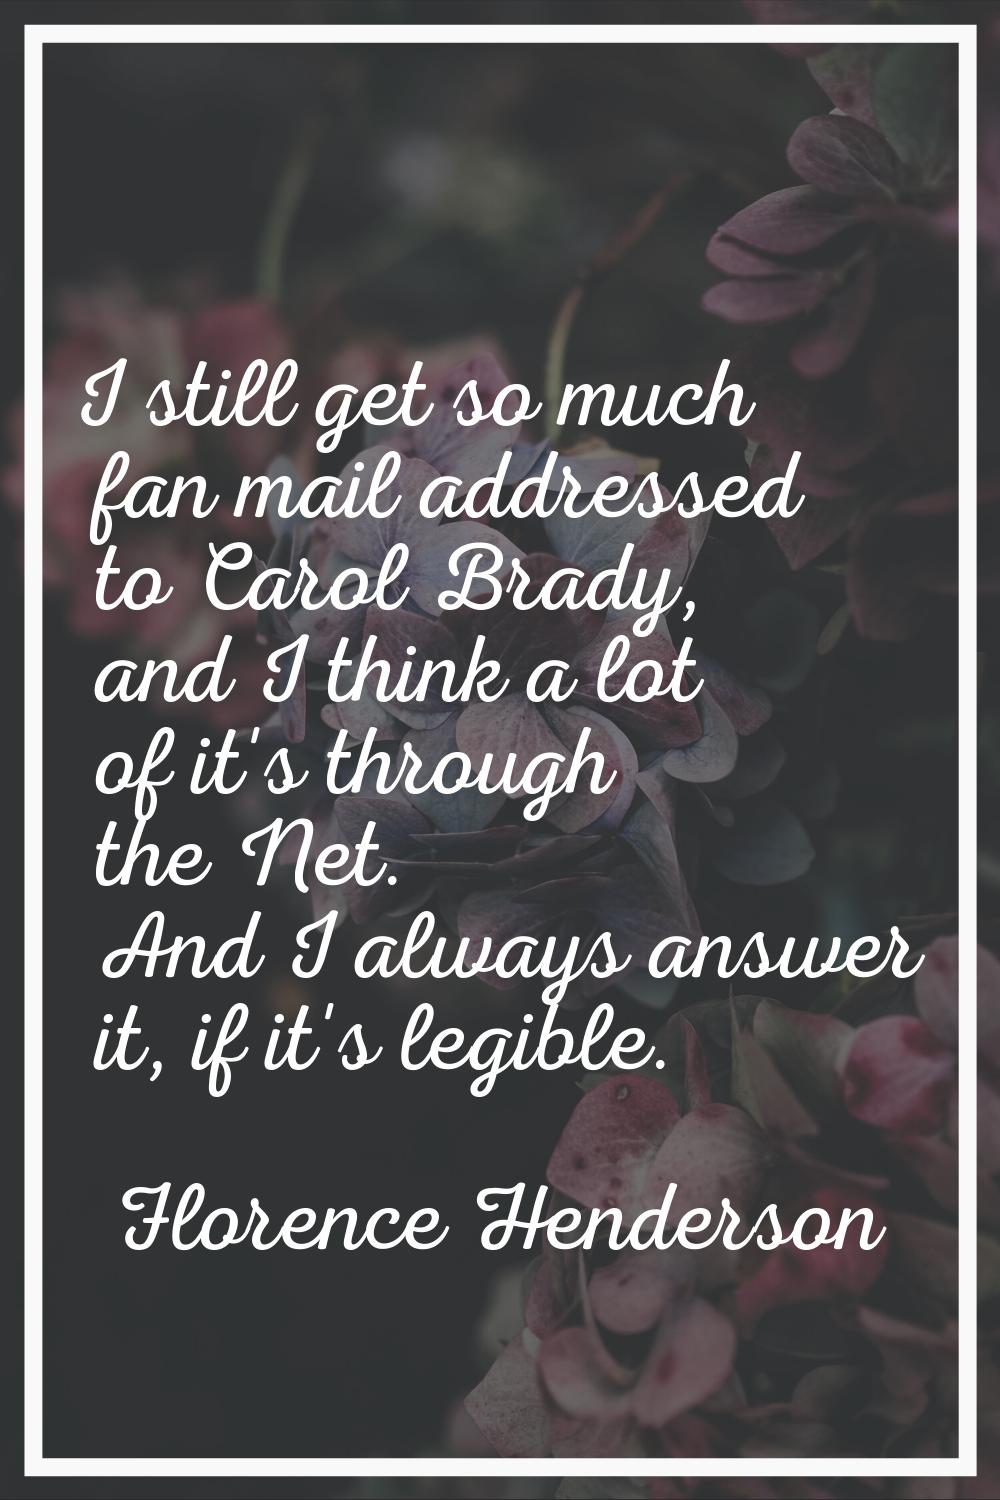 I still get so much fan mail addressed to Carol Brady, and I think a lot of it's through the Net. A